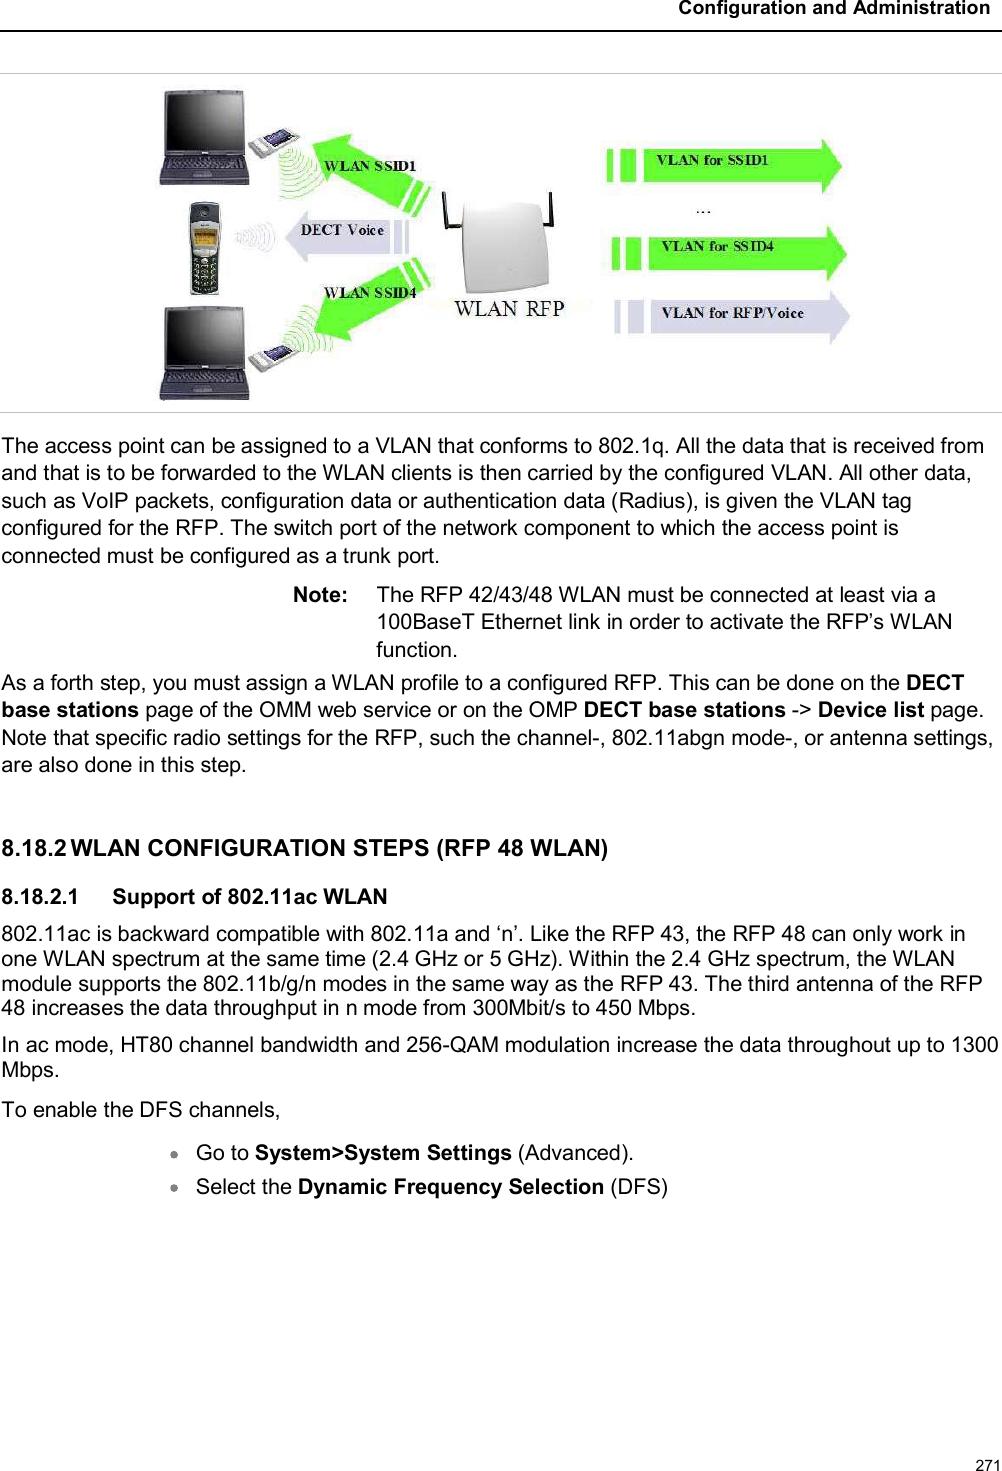 Configuration and Administration271The access point can be assigned to a VLAN that conforms to 802.1q. All the data that is received from and that is to be forwarded to the WLAN clients is then carried by the configured VLAN. All other data, such as VoIP packets, configuration data or authentication data (Radius), is given the VLAN tag configured for the RFP. The switch port of the network component to which the access point is connected must be configured as a trunk port.Note: The RFP 42/43/48 WLAN must be connected at least via a 100BaseT Ethernet link in order to activate the RFP’s WLAN function.As a forth step, you must assign a WLAN profile to a configured RFP. This can be done on the DECT base stations page of the OMM web service or on the OMP DECT base stations -&gt; Device list page. Note that specific radio settings for the RFP, such the channel-, 802.11abgn mode-, or antenna settings, are also done in this step.8.18.2 WLAN CONFIGURATION STEPS (RFP 48 WLAN)8.18.2.1 Support of 802.11ac WLAN802.11ac is backward compatible with 802.11a and ‘n’. Like the RFP 43, the RFP 48 can only work in one WLAN spectrum at the same time (2.4 GHz or 5 GHz). Within the 2.4 GHz spectrum, the WLAN module supports the 802.11b/g/n modes in the same way as the RFP 43. The third antenna of the RFP 48 increases the data throughput in n mode from 300Mbit/s to 450 Mbps. In ac mode, HT80 channel bandwidth and 256-QAM modulation increase the data throughout up to 1300 Mbps.To enable the DFS channels,Go to System&gt;System Settings (Advanced).Select the Dynamic Frequency Selection (DFS)